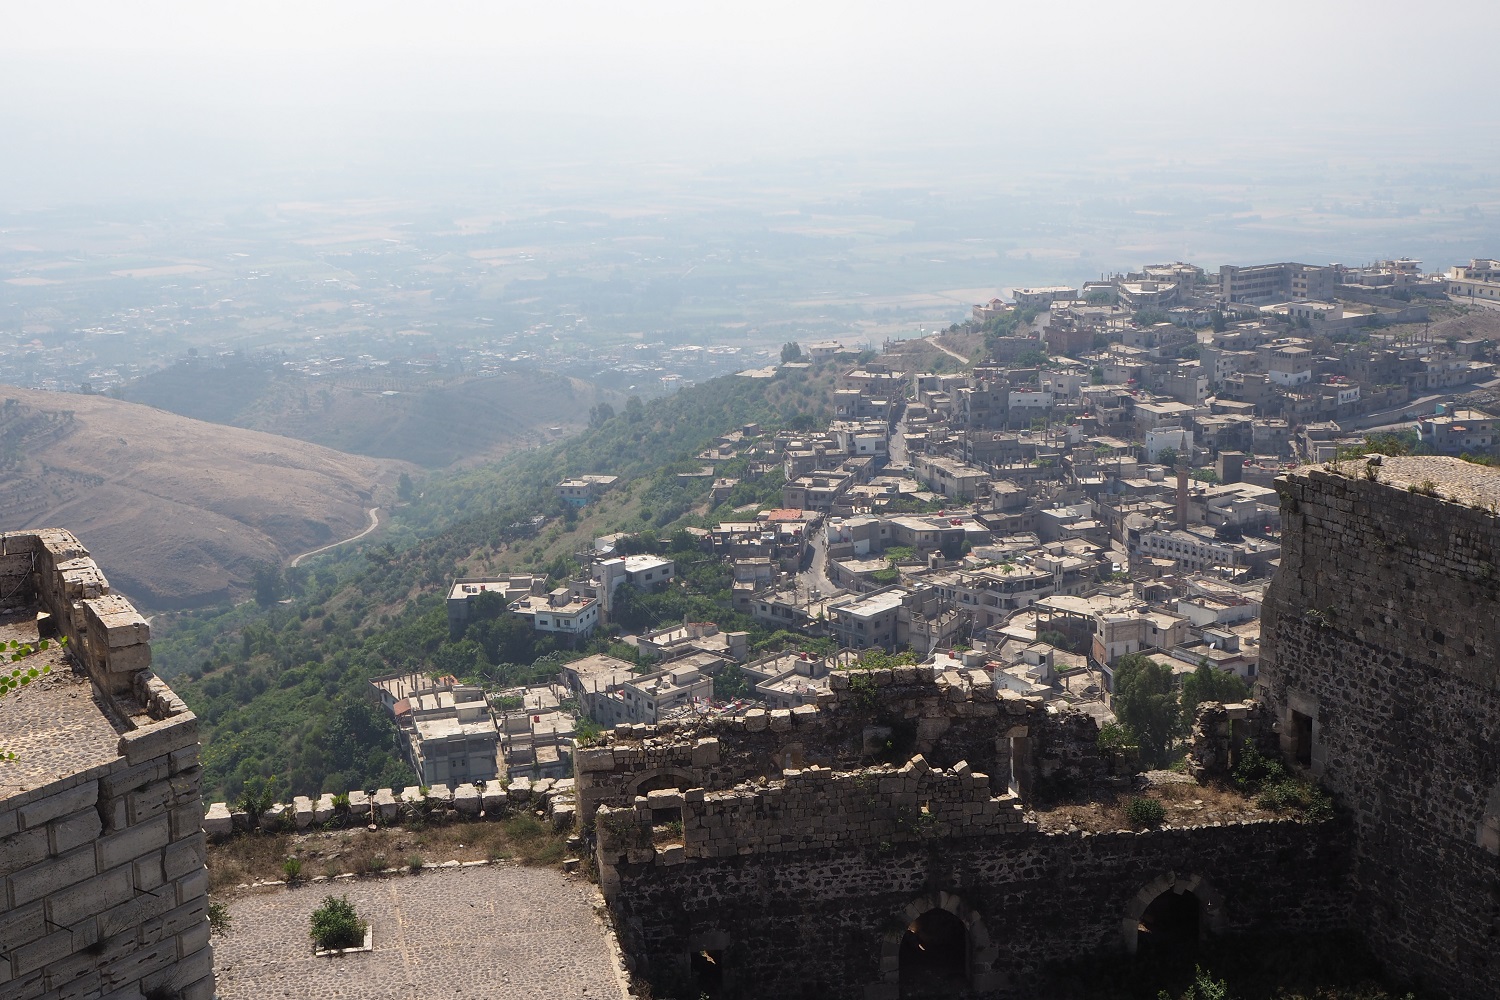 The view looking down on the small town of Al-Husan, where many of the castle workers live (Tom Westcott/MEE)